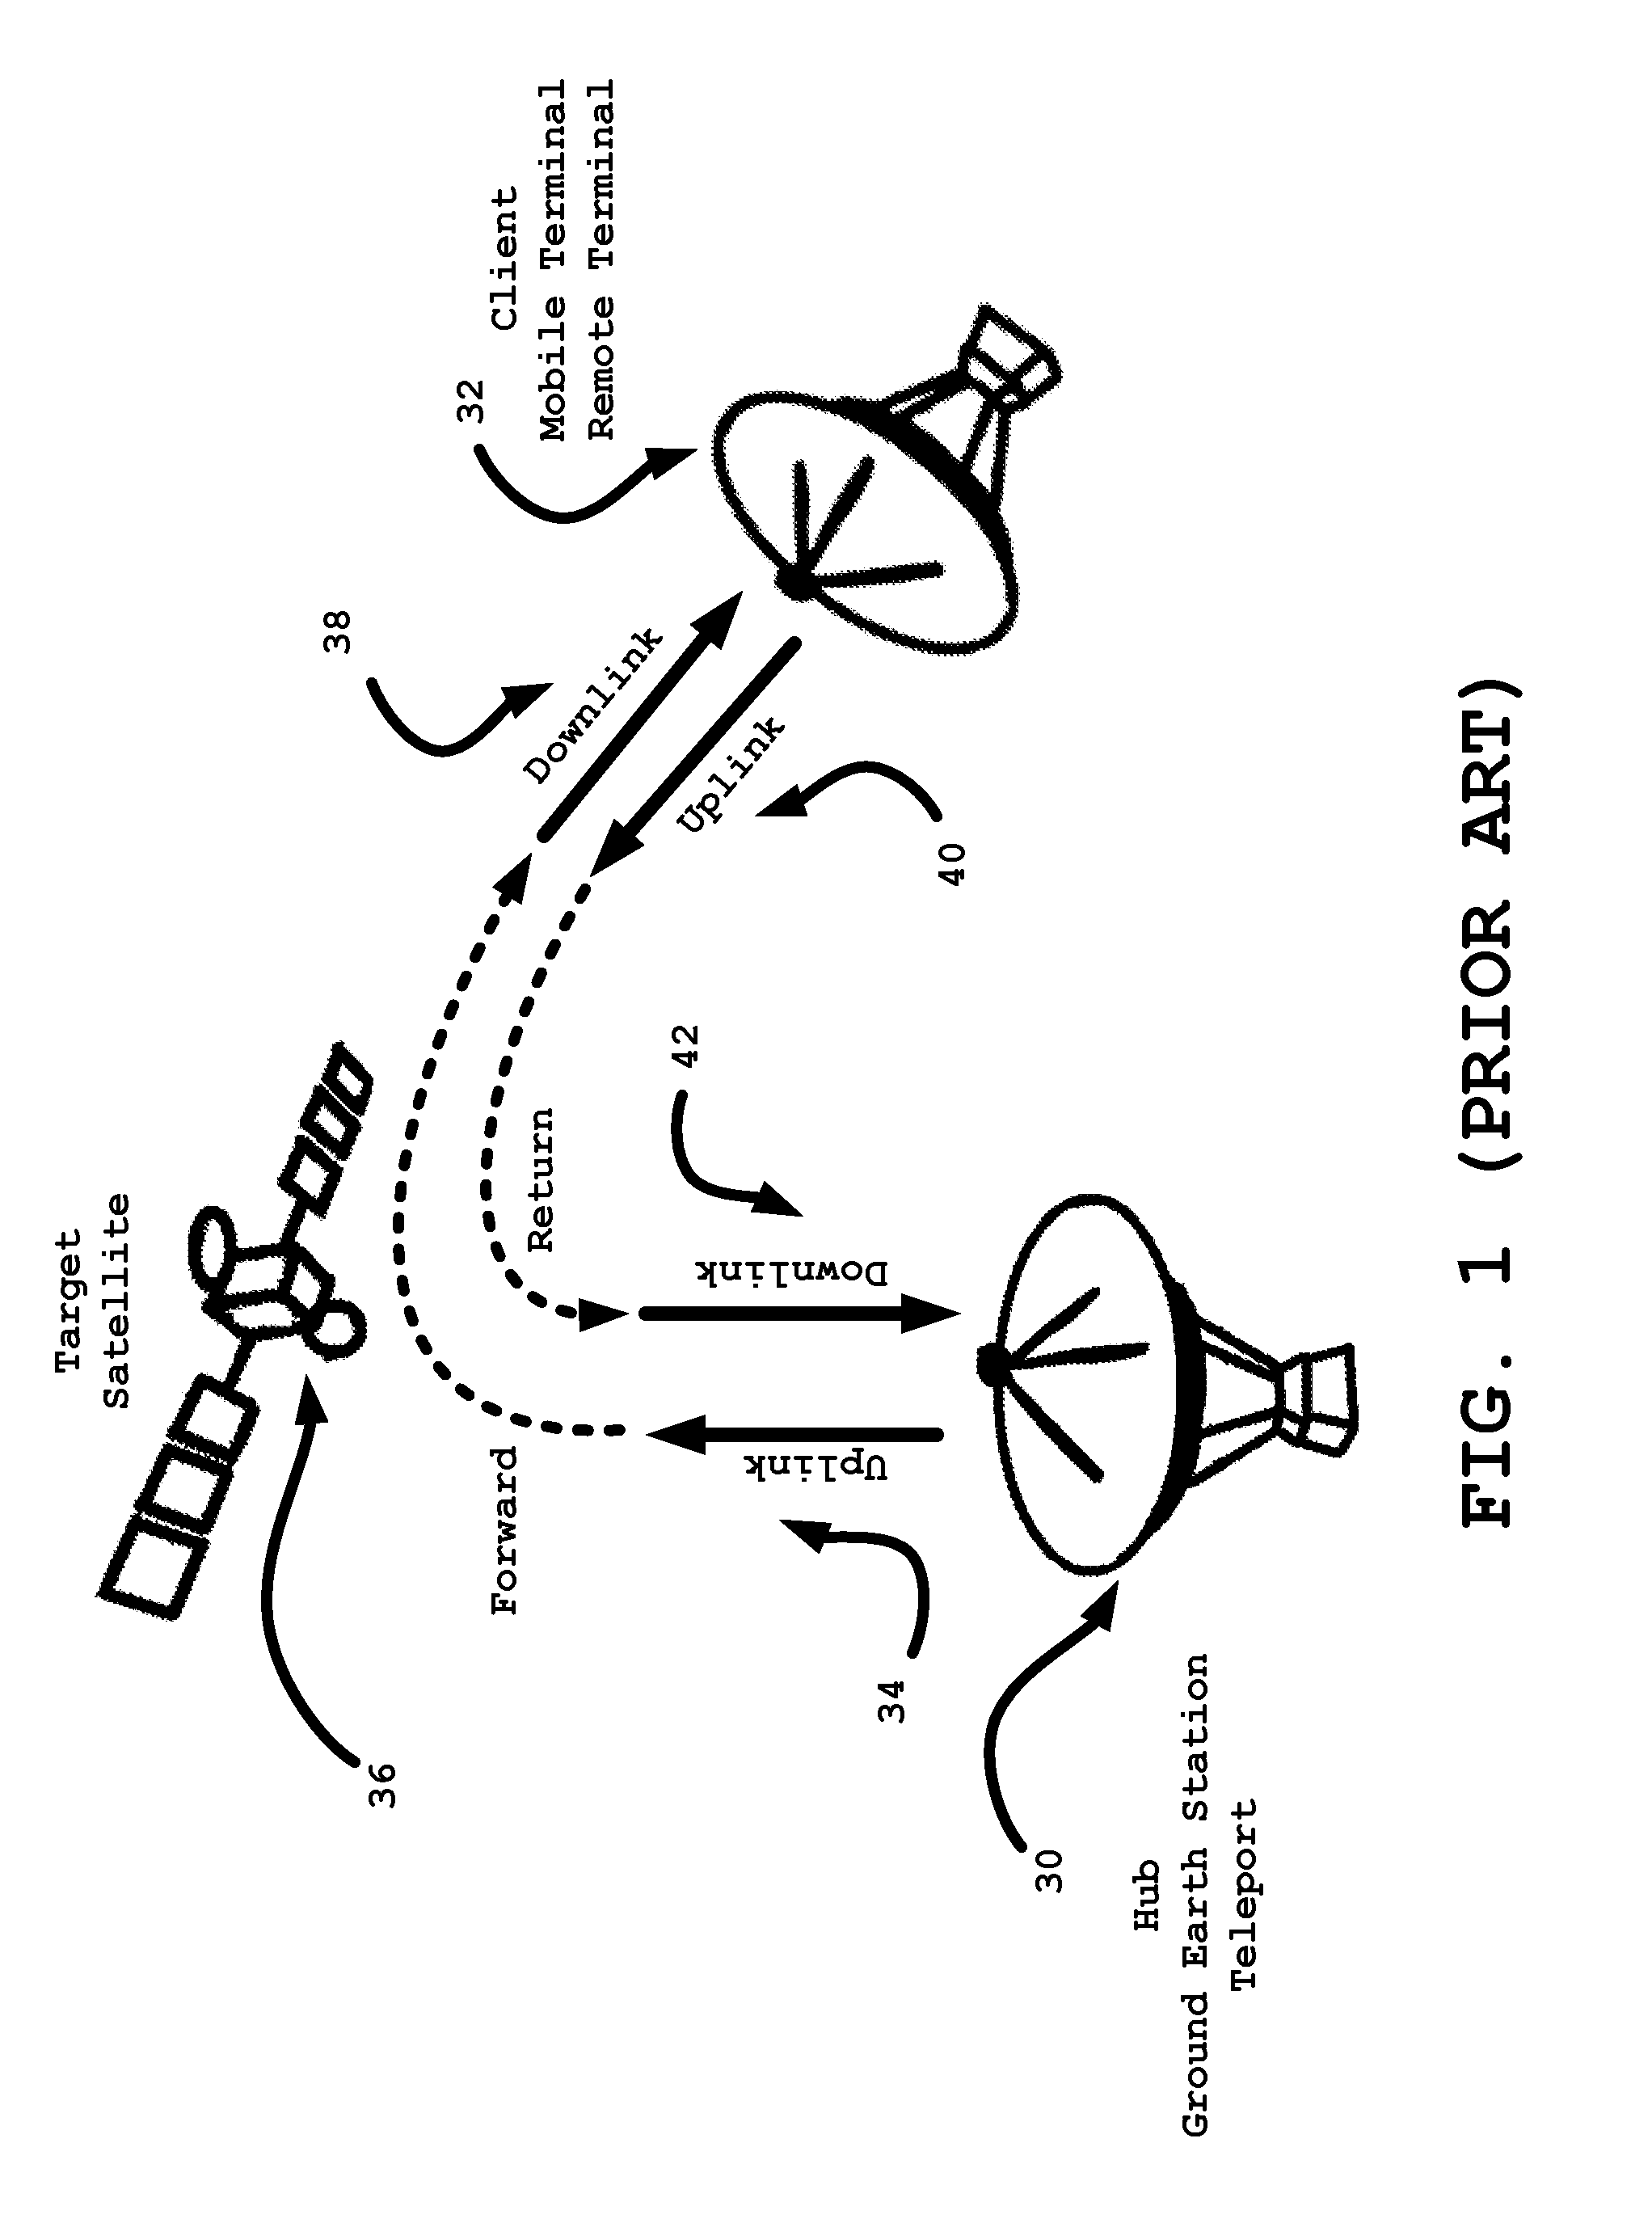 System and method for communicating via a satellite in an inclined geosynchronous orbit